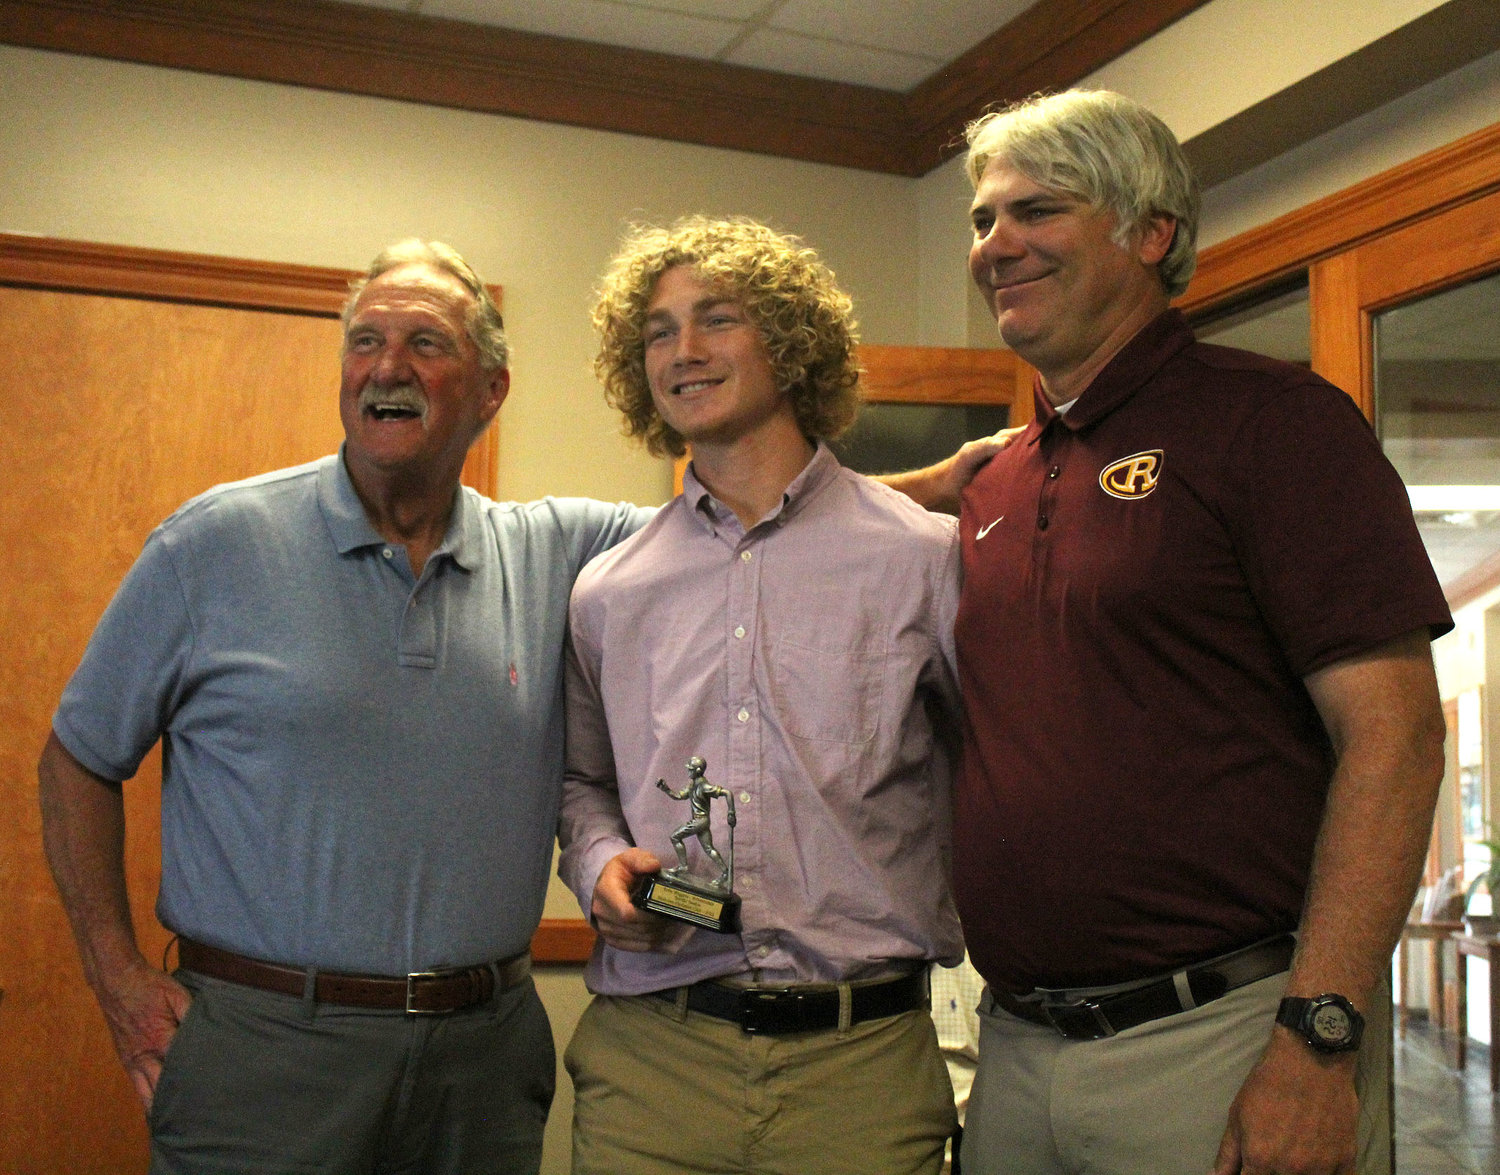 Robertsdale’s Kobe Wiggins was honored as one of Midtown Optimst Club’s Extraordinary Eight and was presented the award by Randy McGilberry at the Azalea City Golf Course in Mobile during the May 25 luncheon. He was joined by Golden Bear Head Coach Peter Bezeredi.